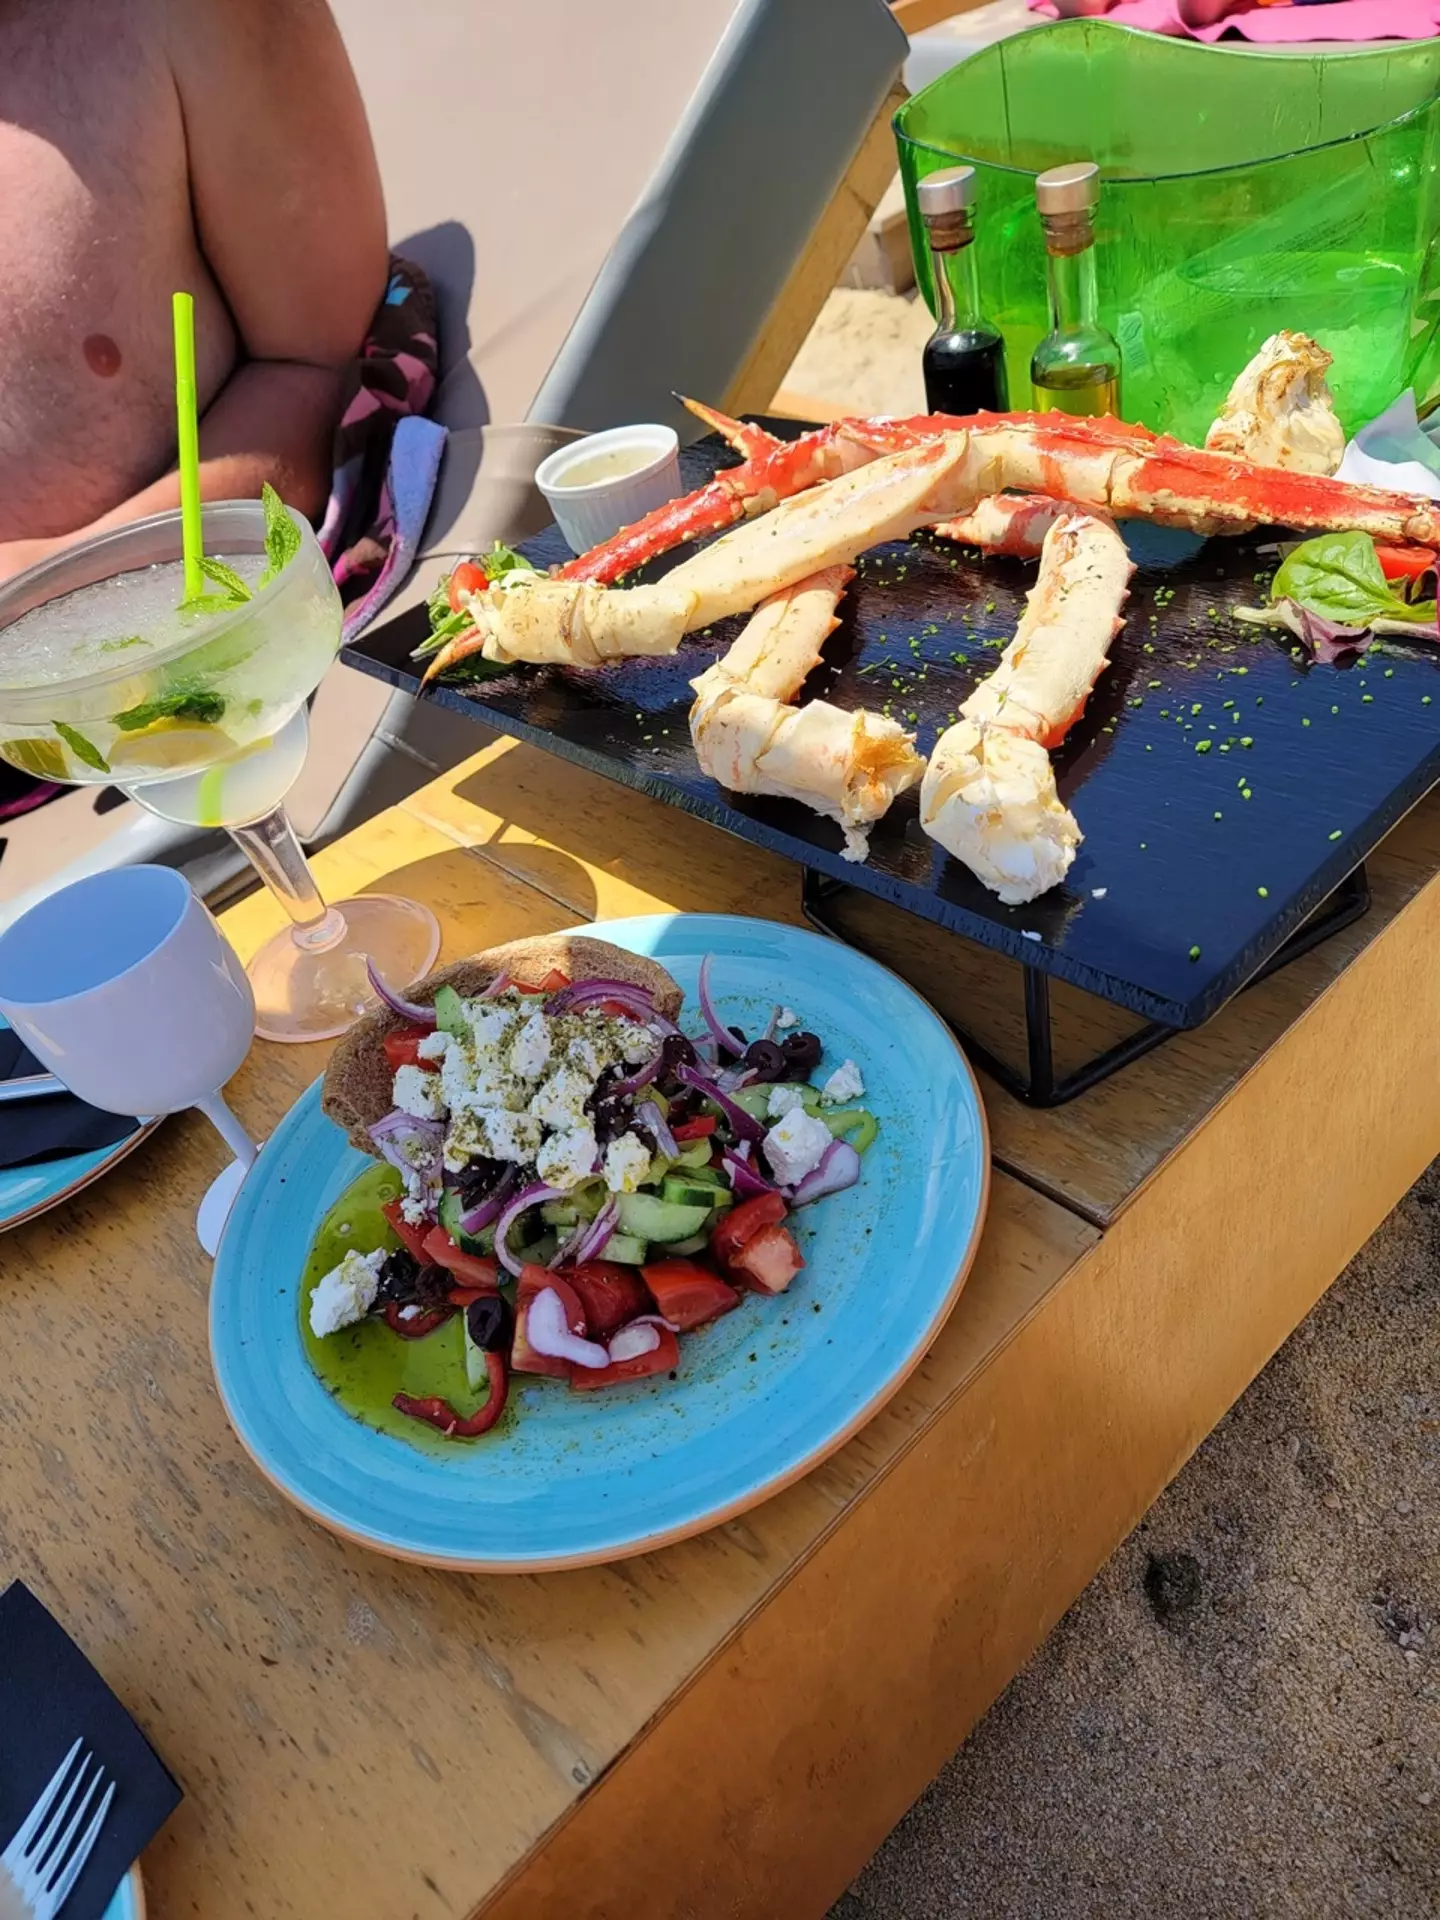 Tourists are absolutely fuming after being made to pay upwards of £700 for two drinks, four crab legs and a salad at a notorious restaurant in Greece.